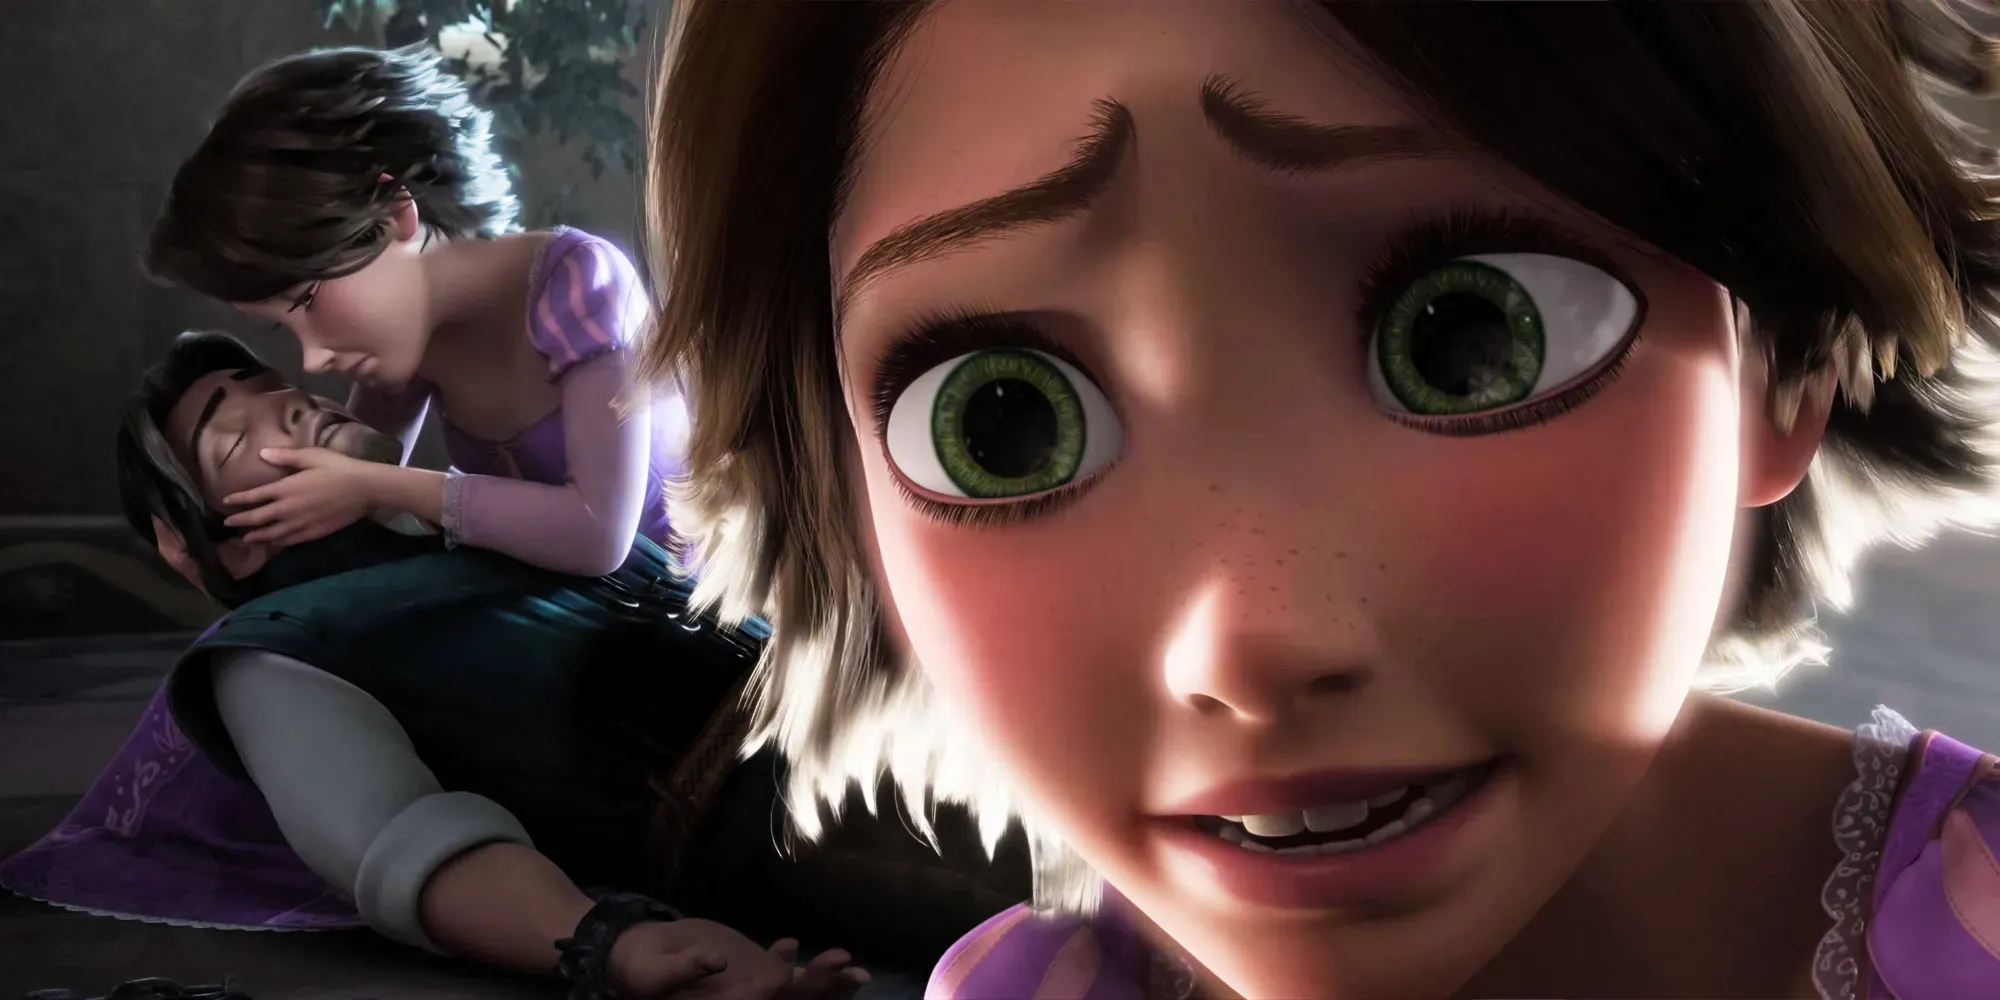 Disney Theory Completely Changes Tangled's Villain